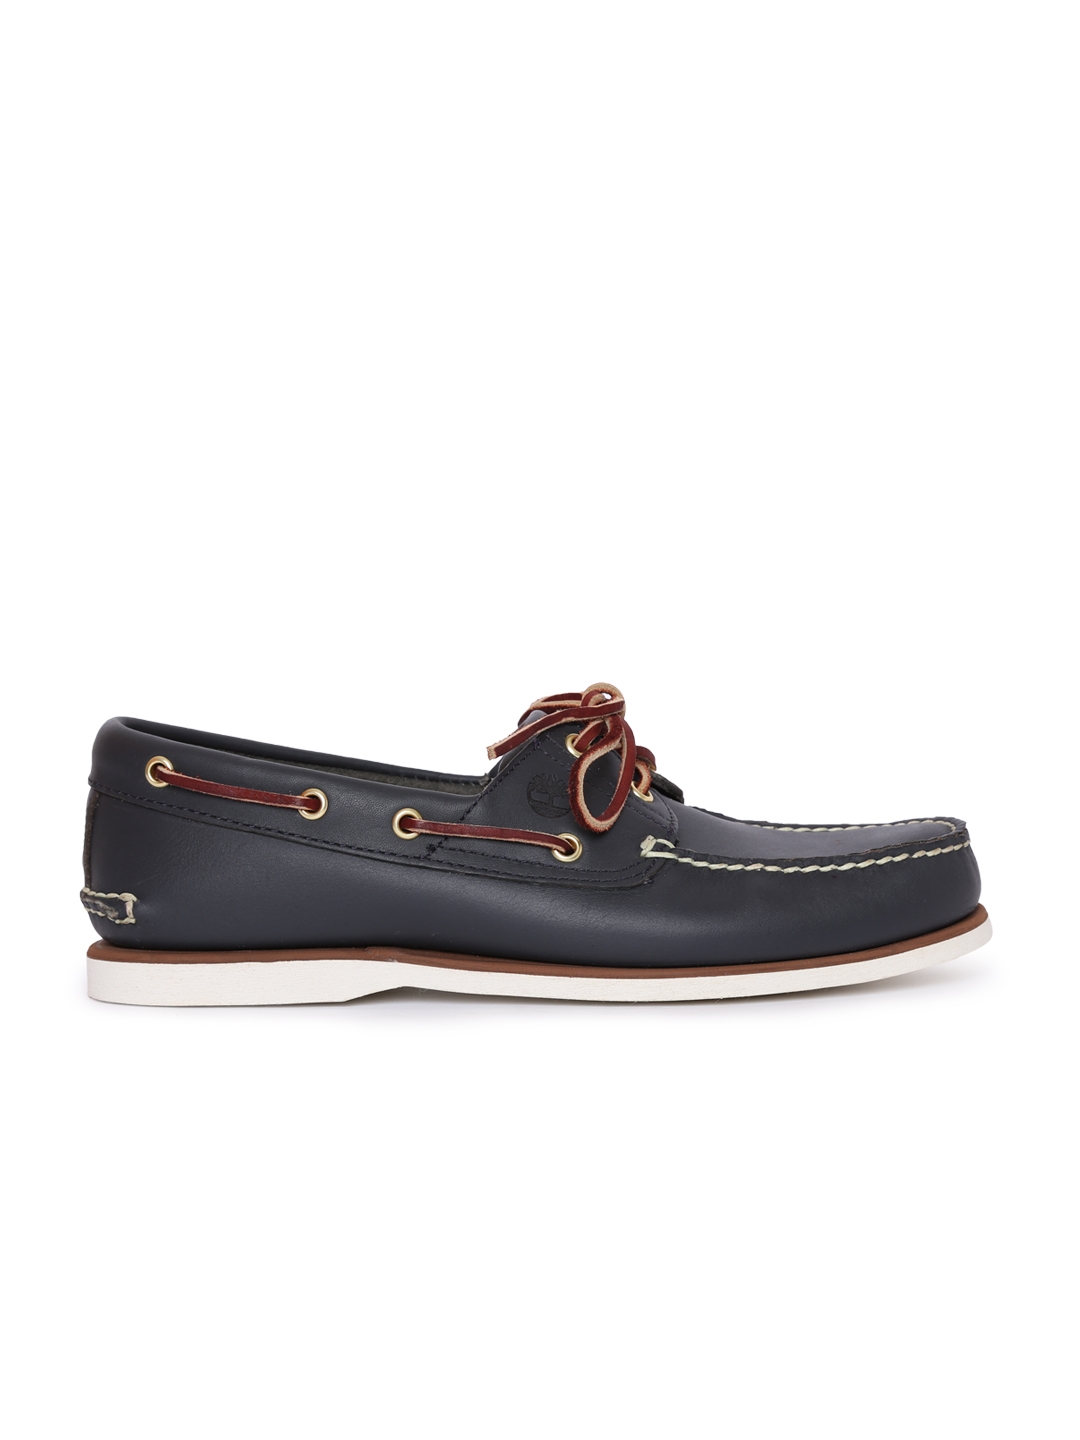 cool 35 Effective Ways to Style Timberland Boat Shoes  The Flawless  Weekend Footwear Check more at httpstylemanncom  Boat shoes Shoes Timberland  boat shoes